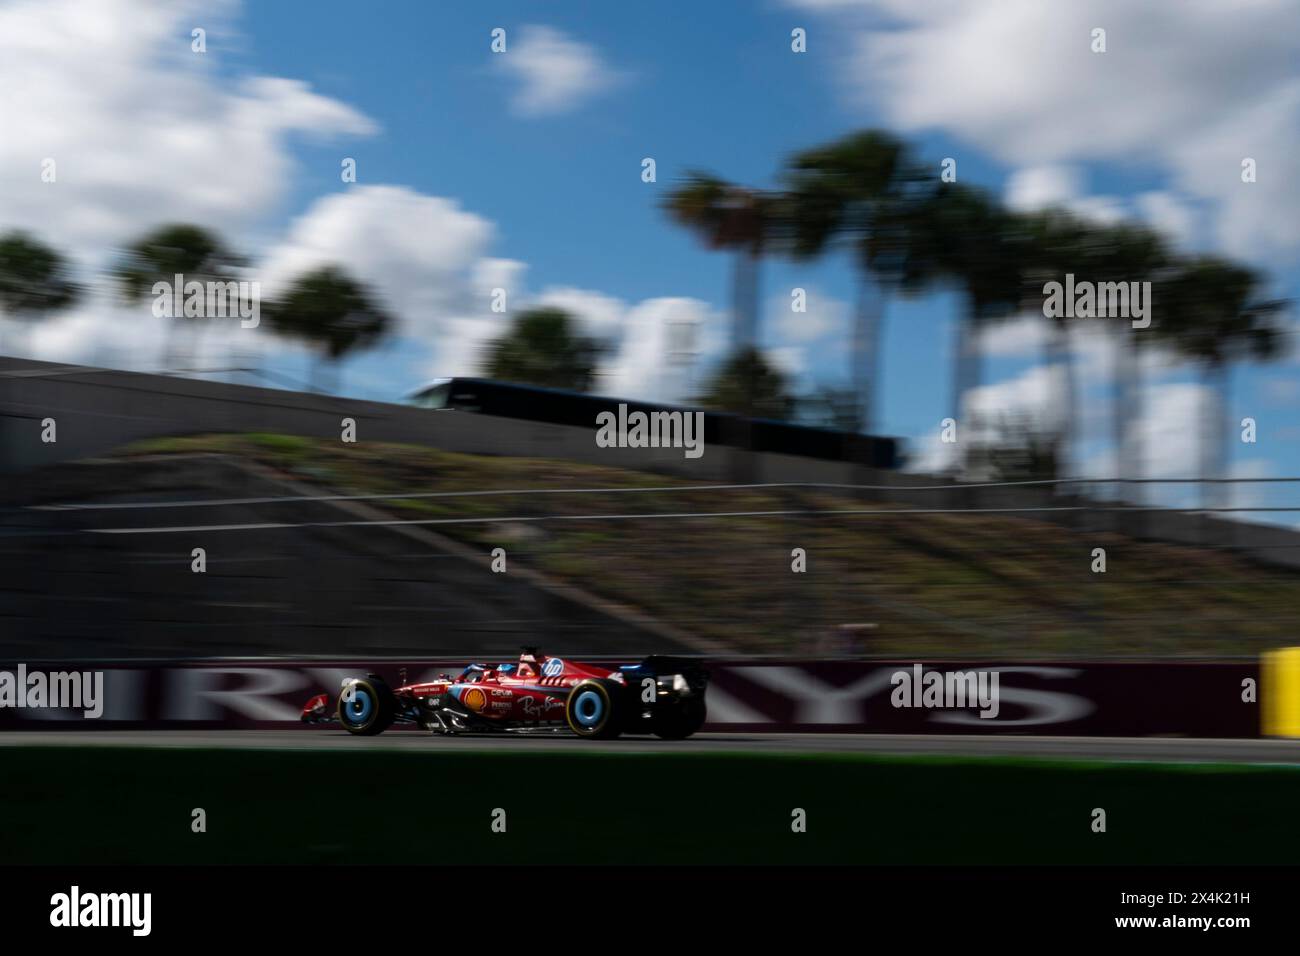 Miami Gardens, United States. 03rd May, 2024. Monaco's Formula One driver Charles Leclerc of Scuderia Ferrari participates in sprint qualifying during the Formula One Miami Grand Prix at the Miami International Autodrome in Miami Gardens, Florida on Friday, May 3, 2024 Photo by Greg Nash/UPI. Credit: UPI/Alamy Live News Stock Photo